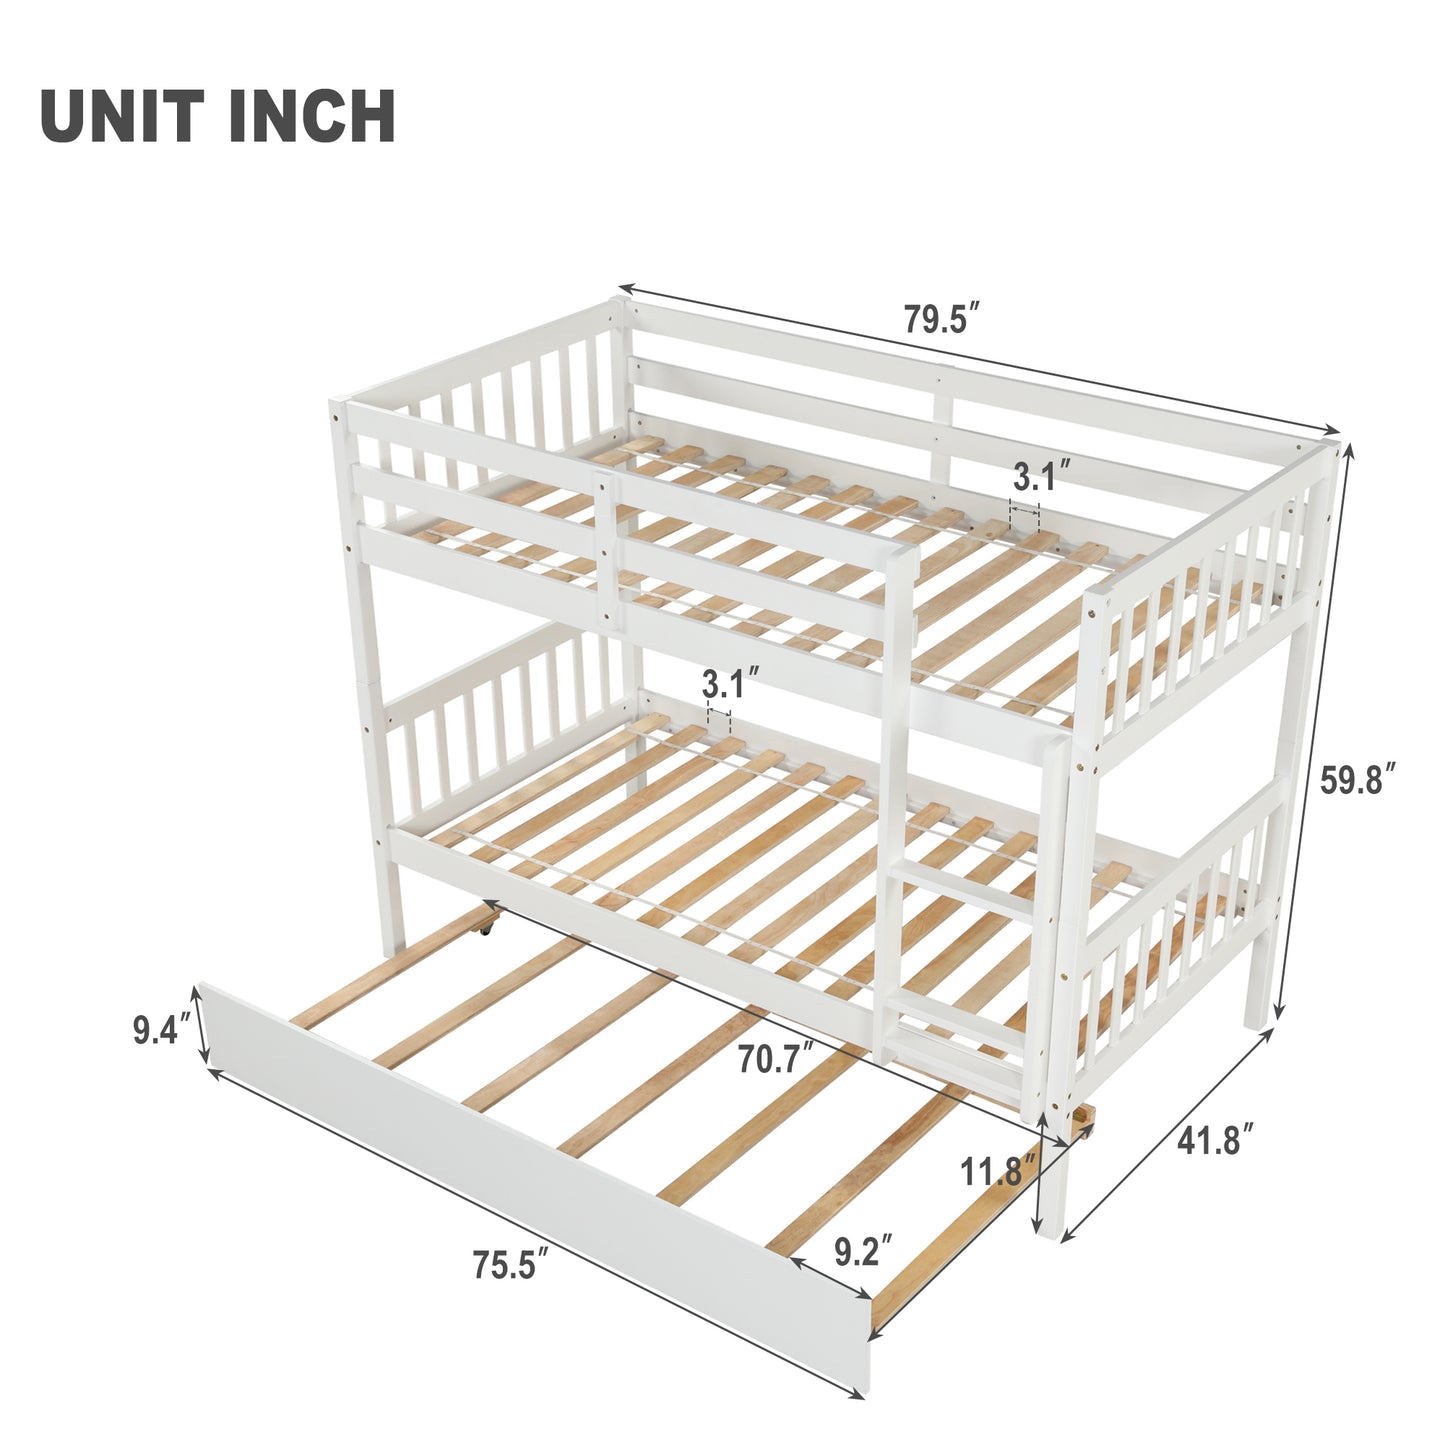 Twin Over Twin Bunk Beds with Trundle, Solid Wood Trundle Bed Frame with Safety Rail and Ladder, Kids/Teens Bedroom, Guest Room Furniture, Can Be converted into 2 Beds, White